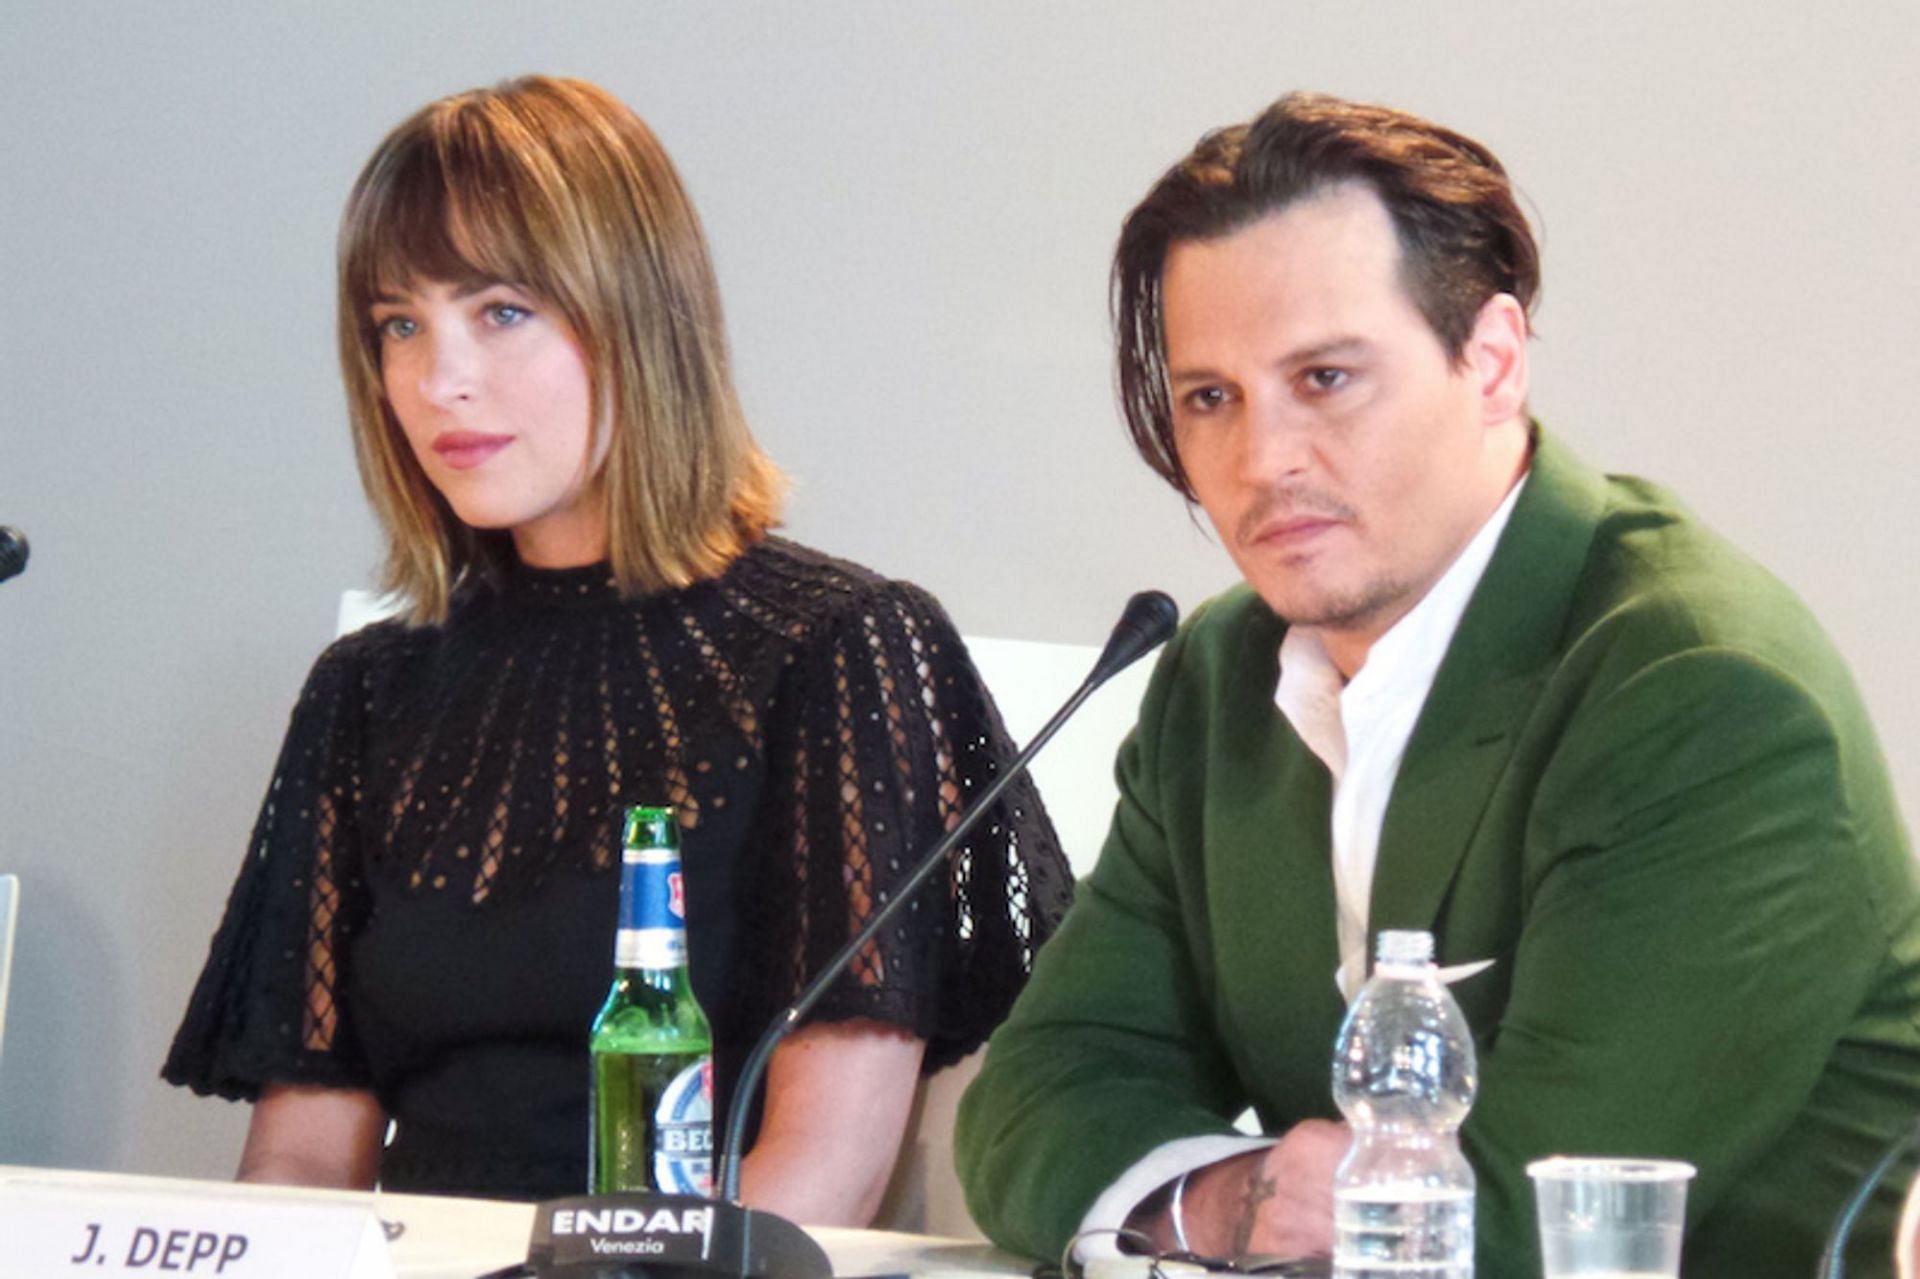 Dakota Johnson reacts to viral TikTok clip of her and Johnny Depp (Image via Getty Images)